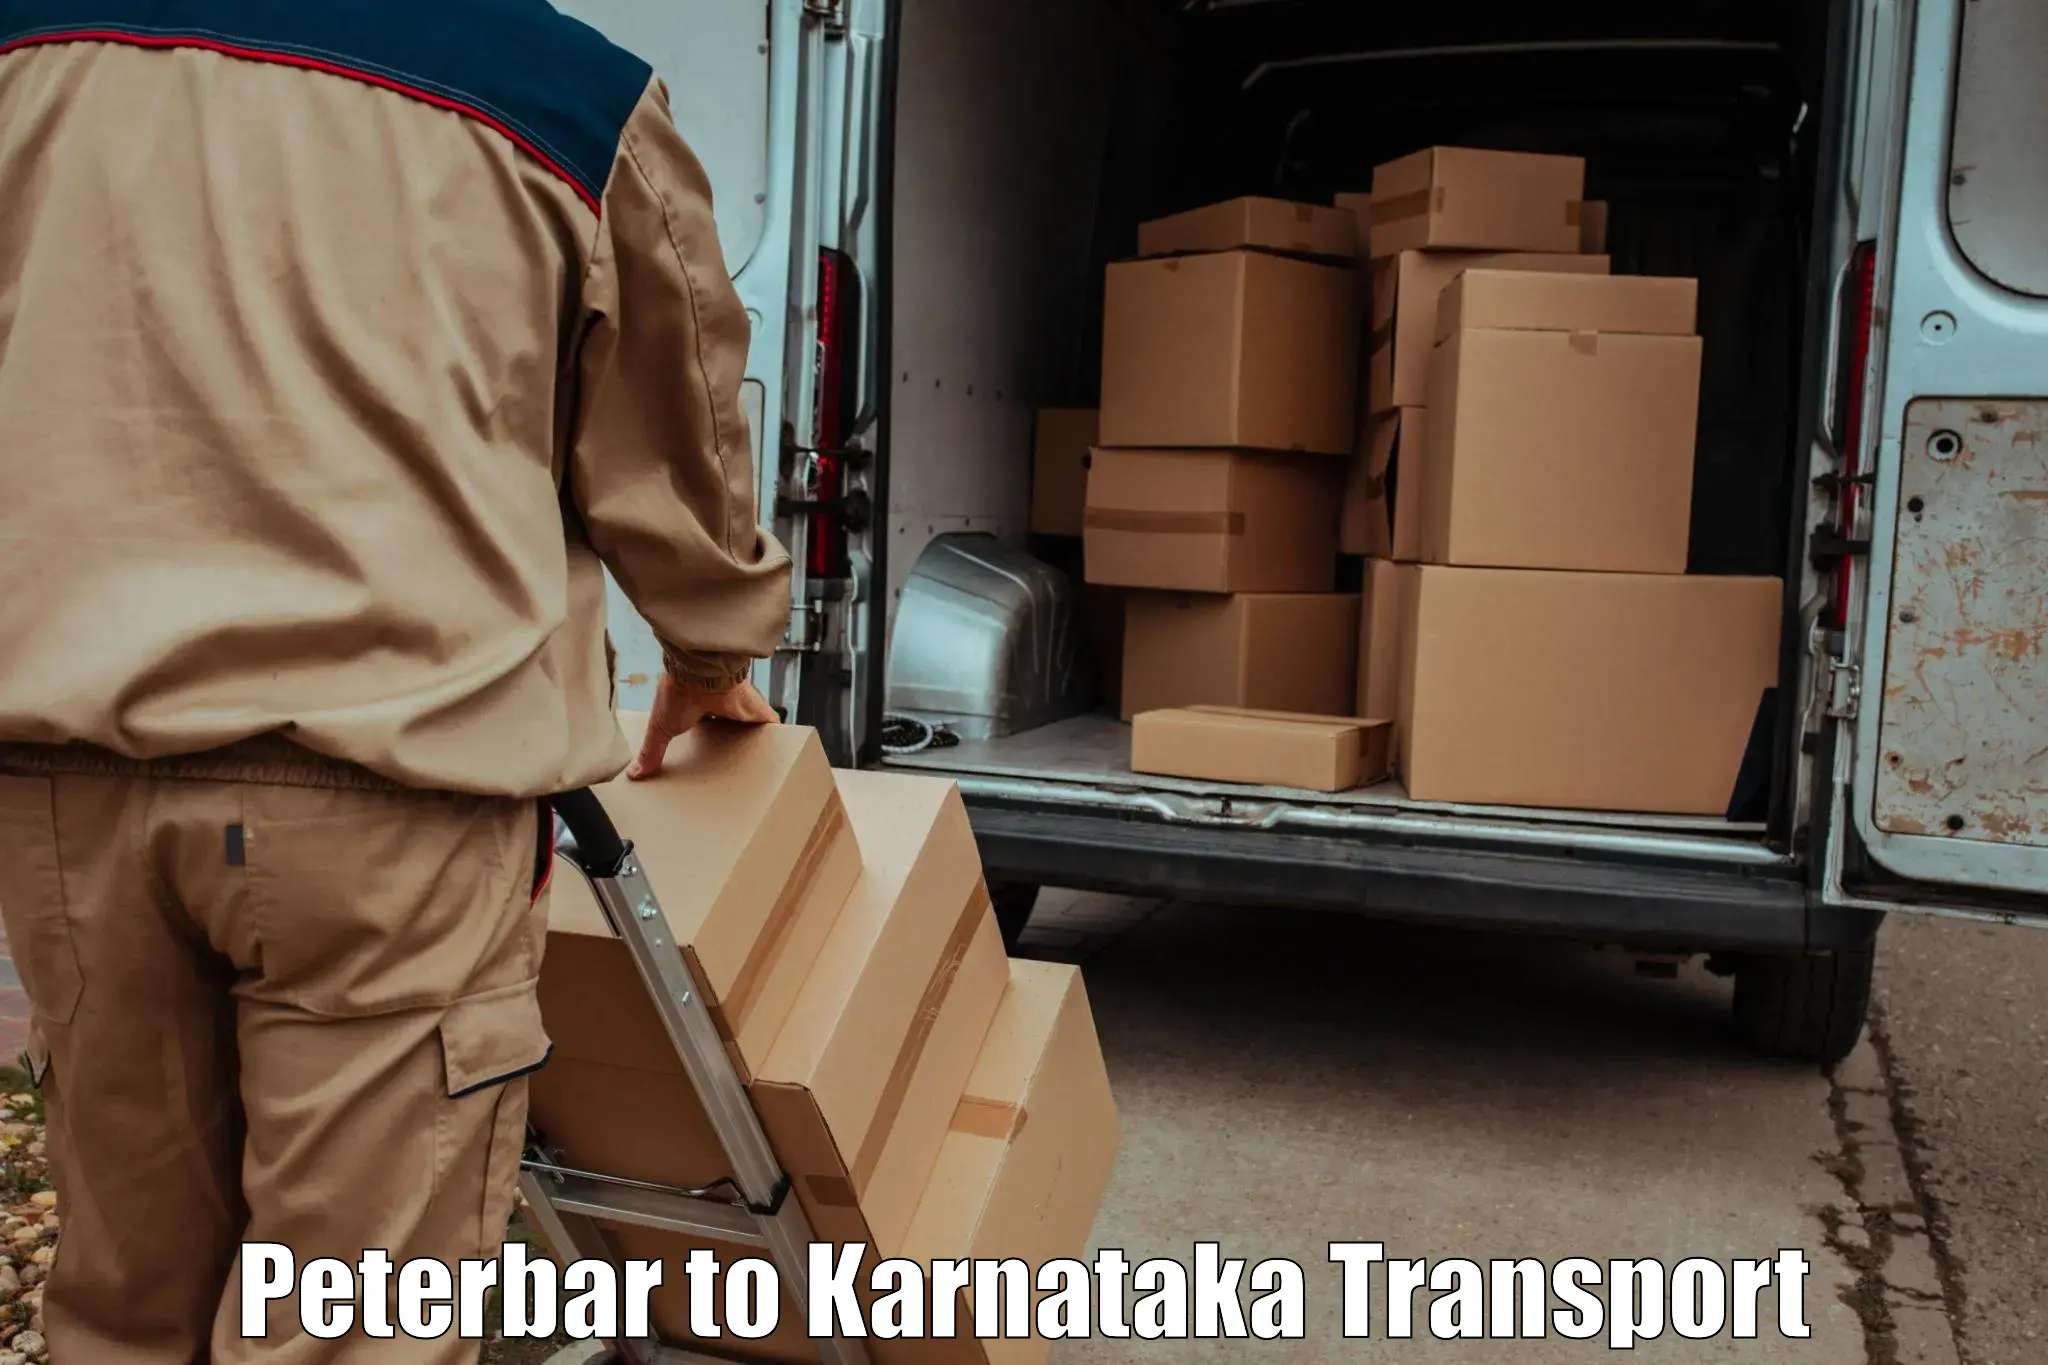 Nationwide transport services Peterbar to Ullal